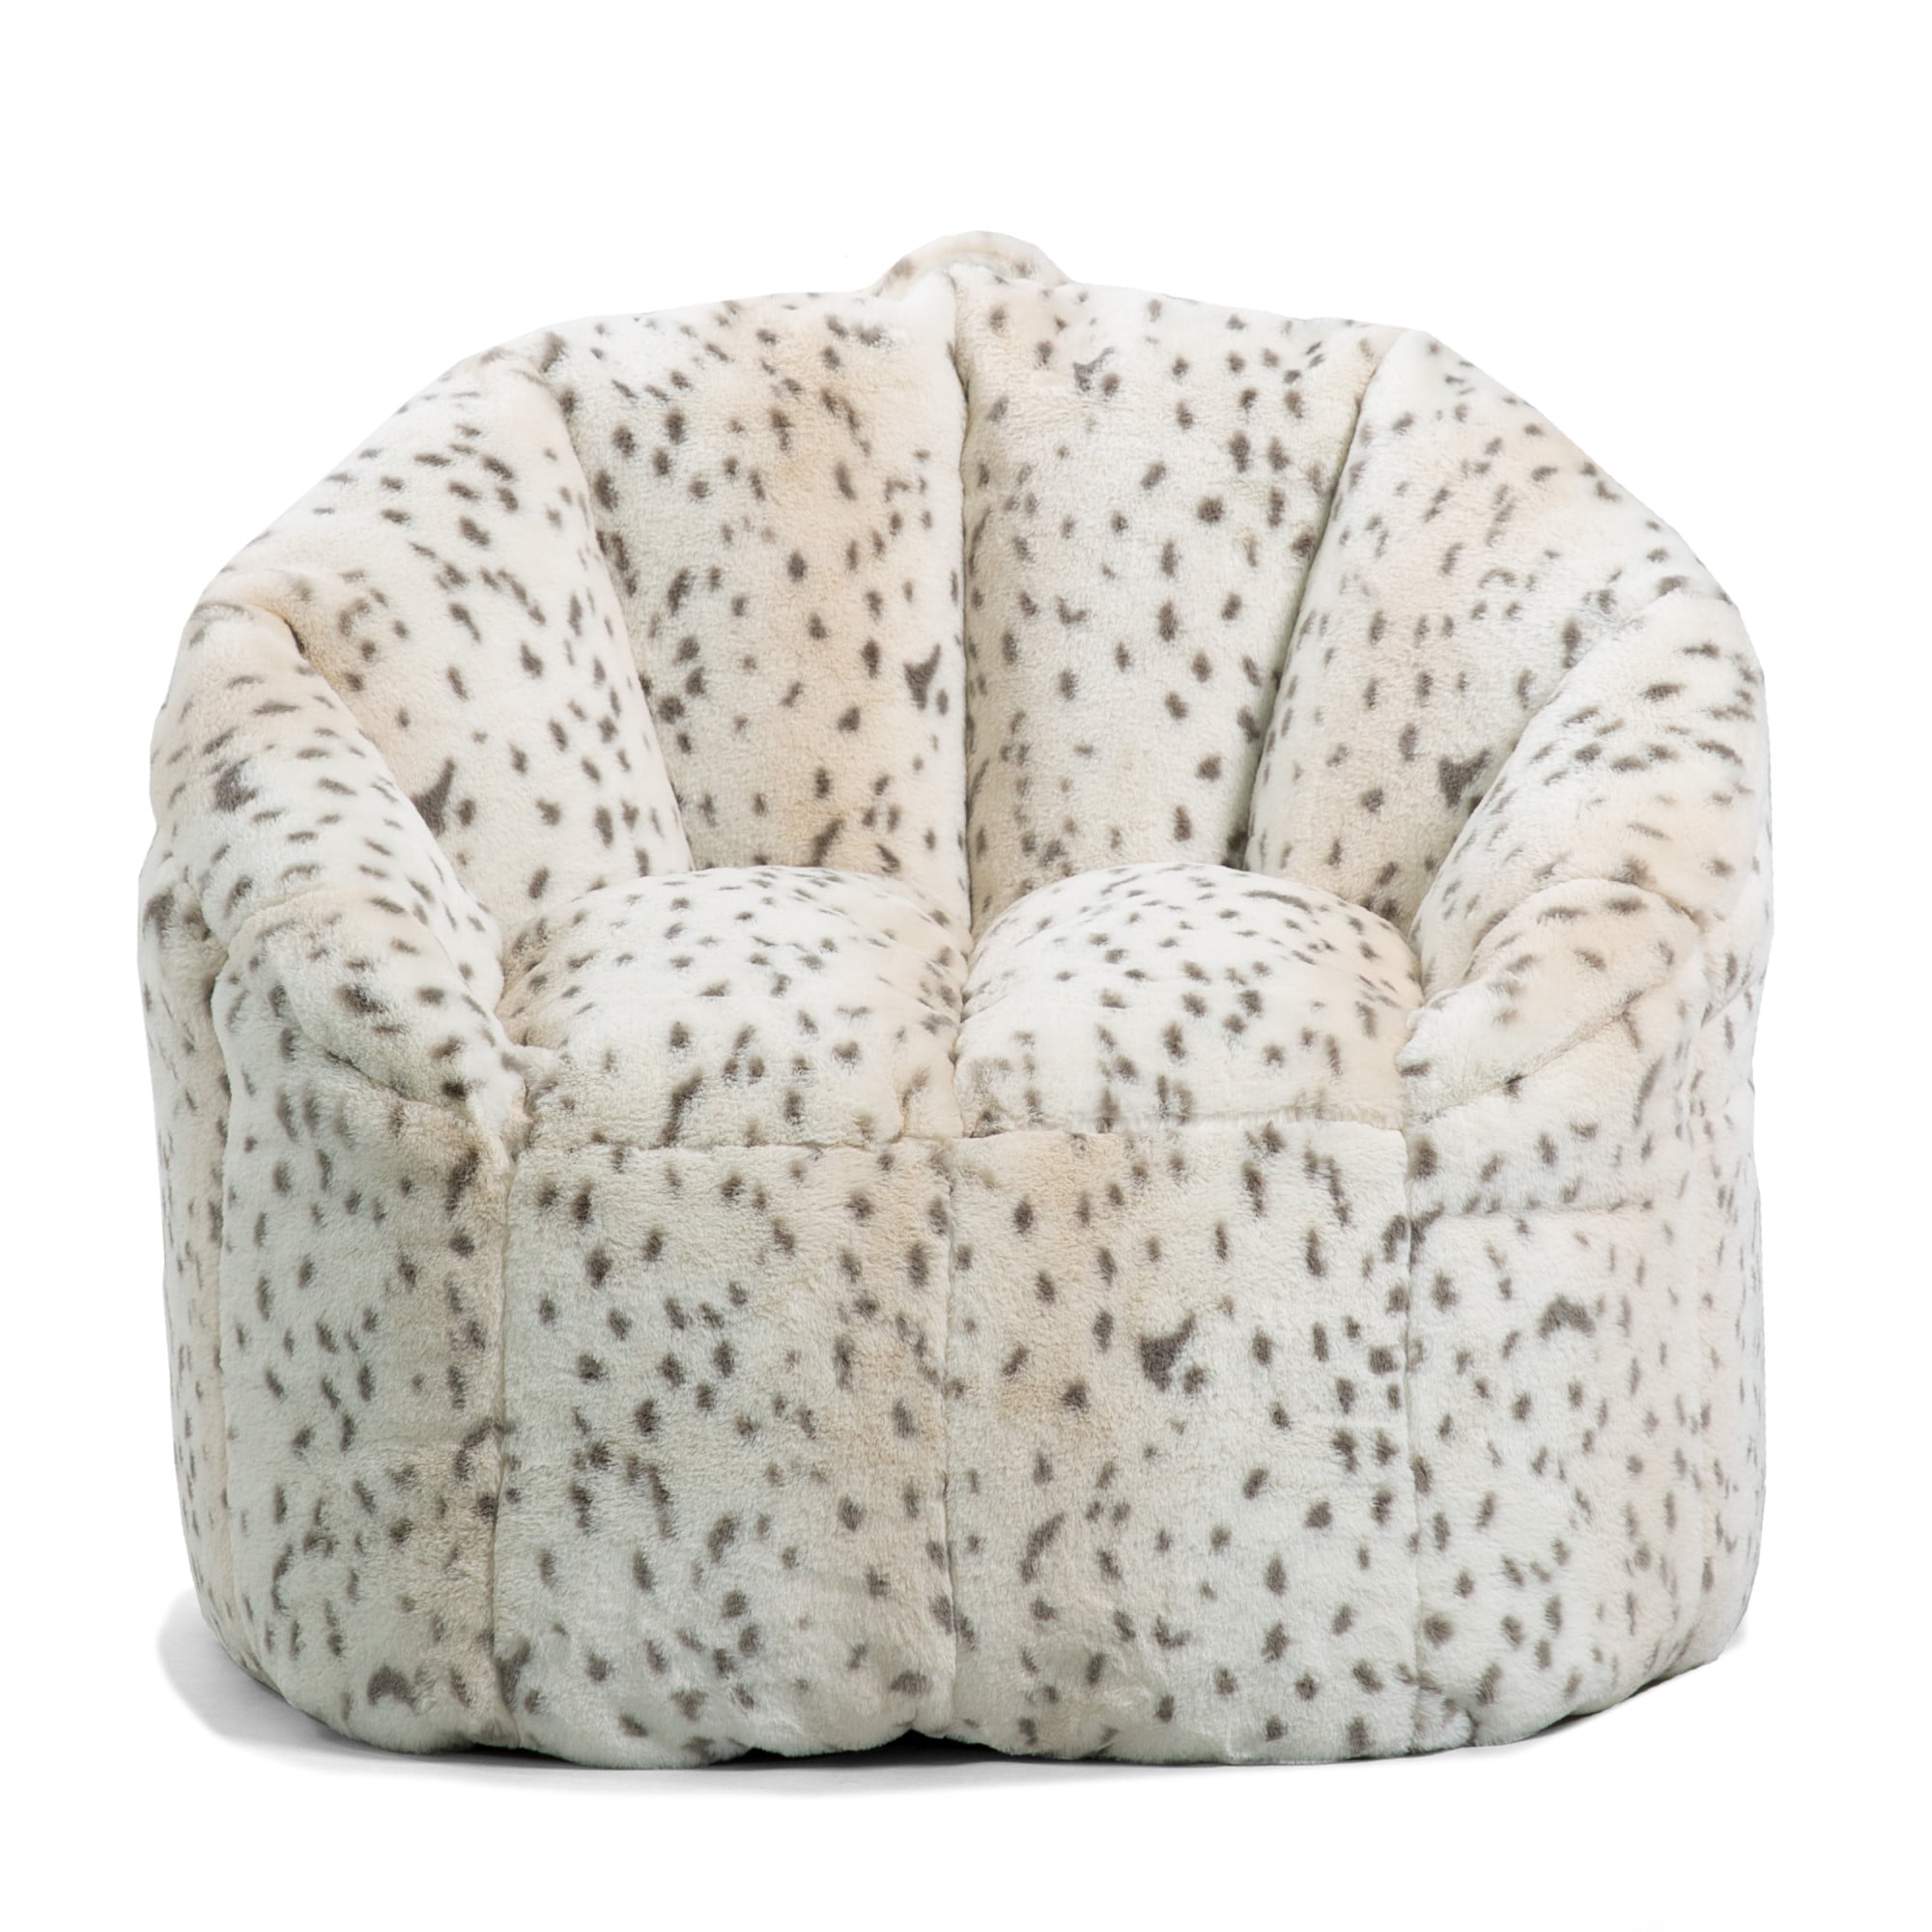 Cow Printed Fur Bean Bag Chair Sofa Without Beans XXXL Size for gift family